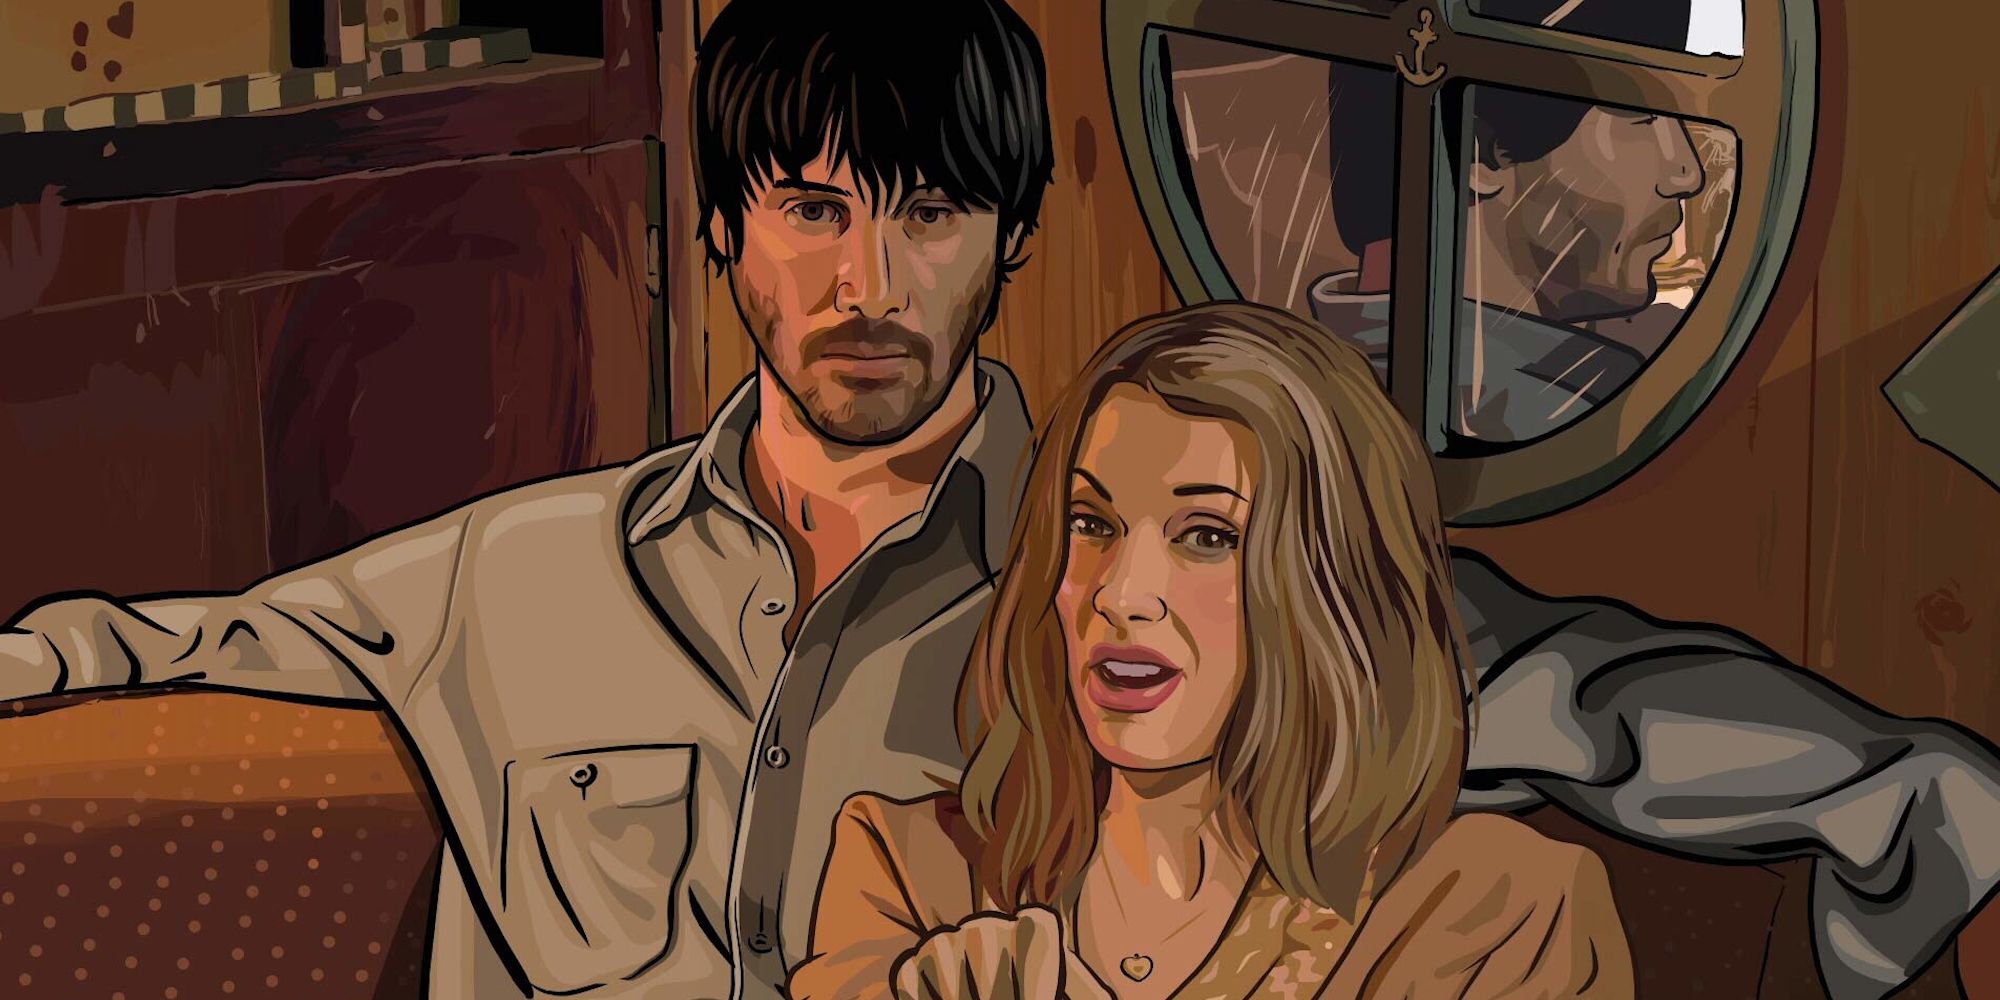 Keanu Reeves in a Scanner Darkly as rotoscopic animation